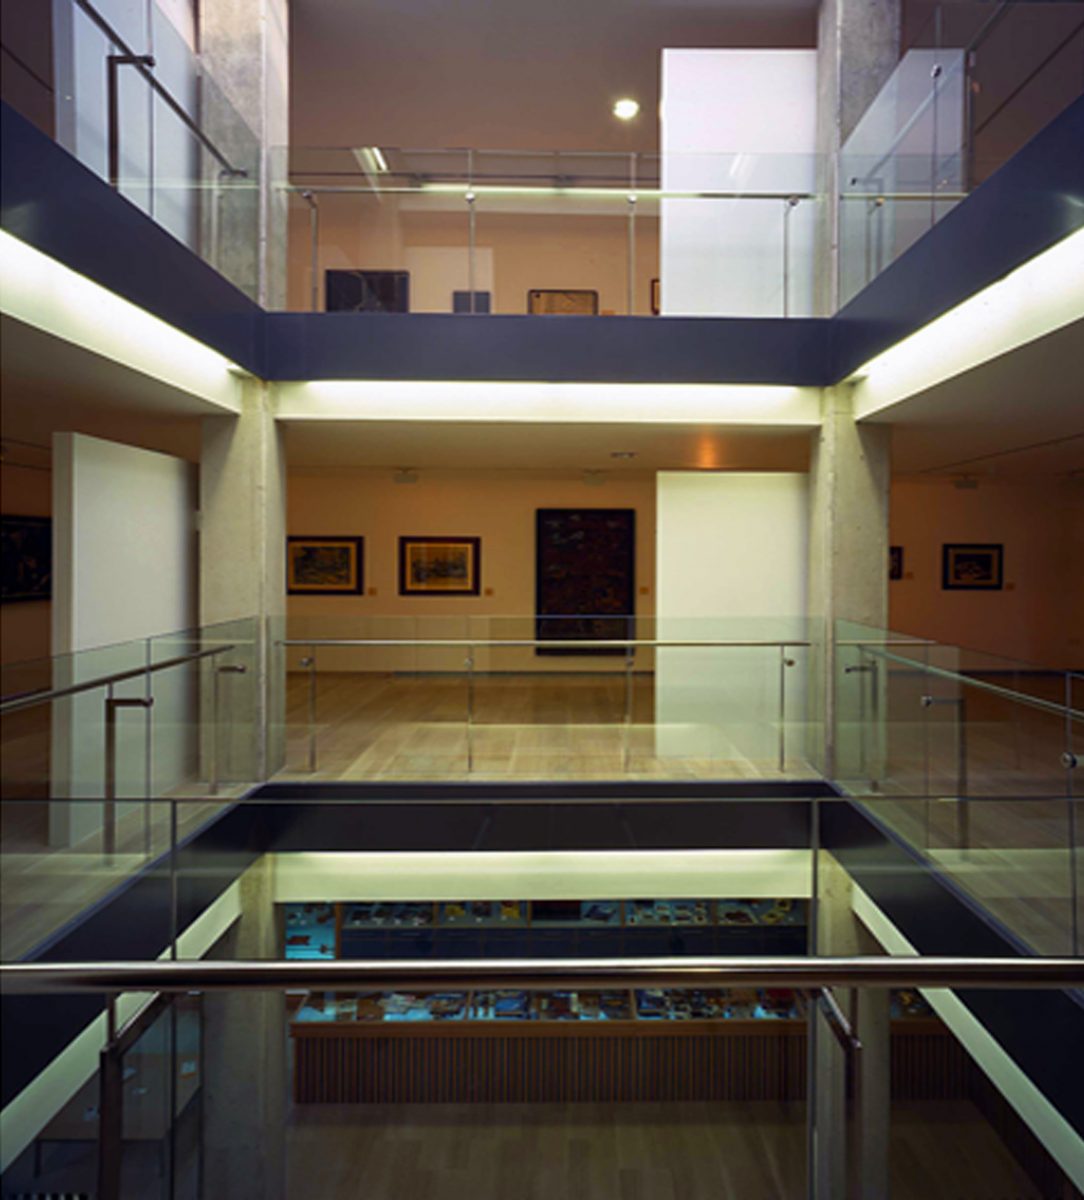 Interior view of the museum with glass railings